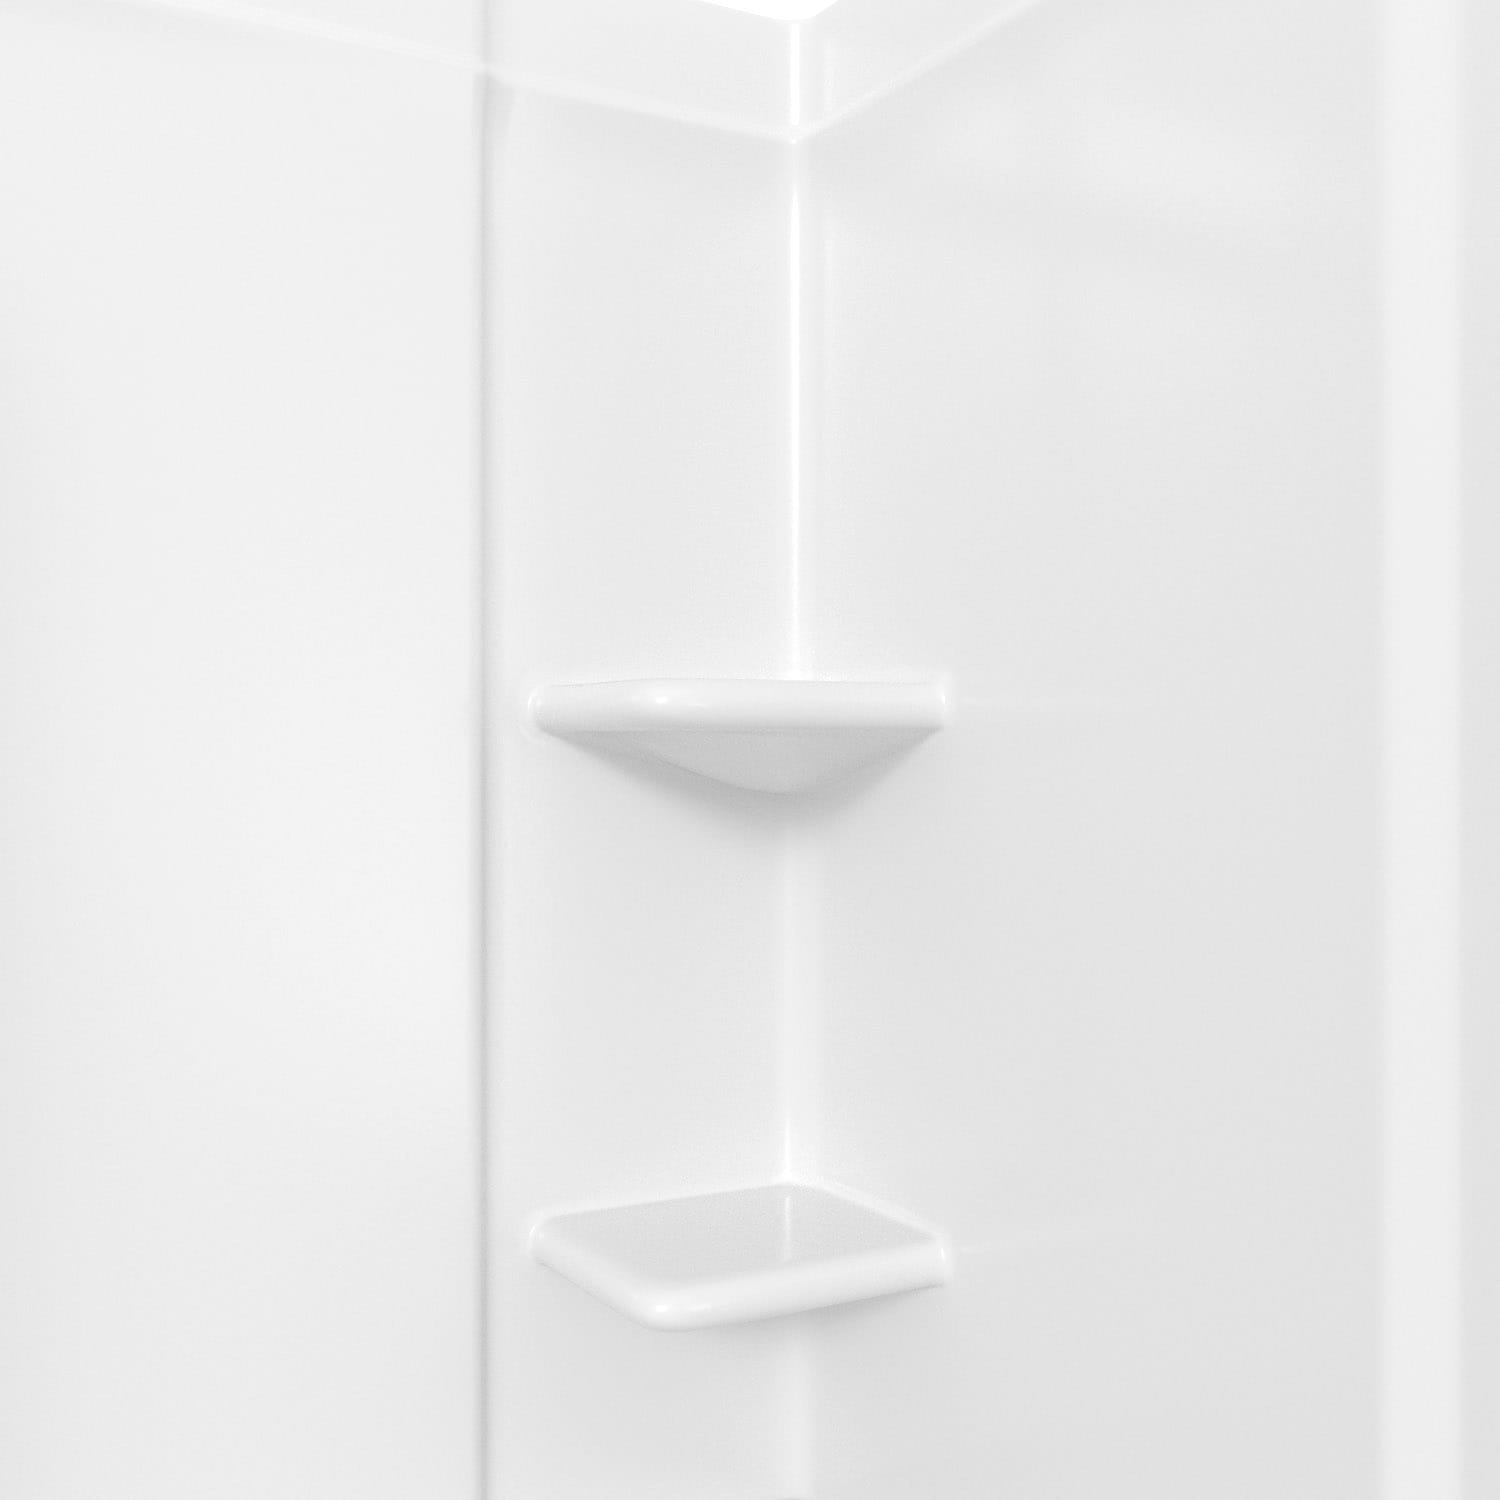 White modular shelves are mounted beside a drop-in bathtub fitted with  white horizontal surround tiles…